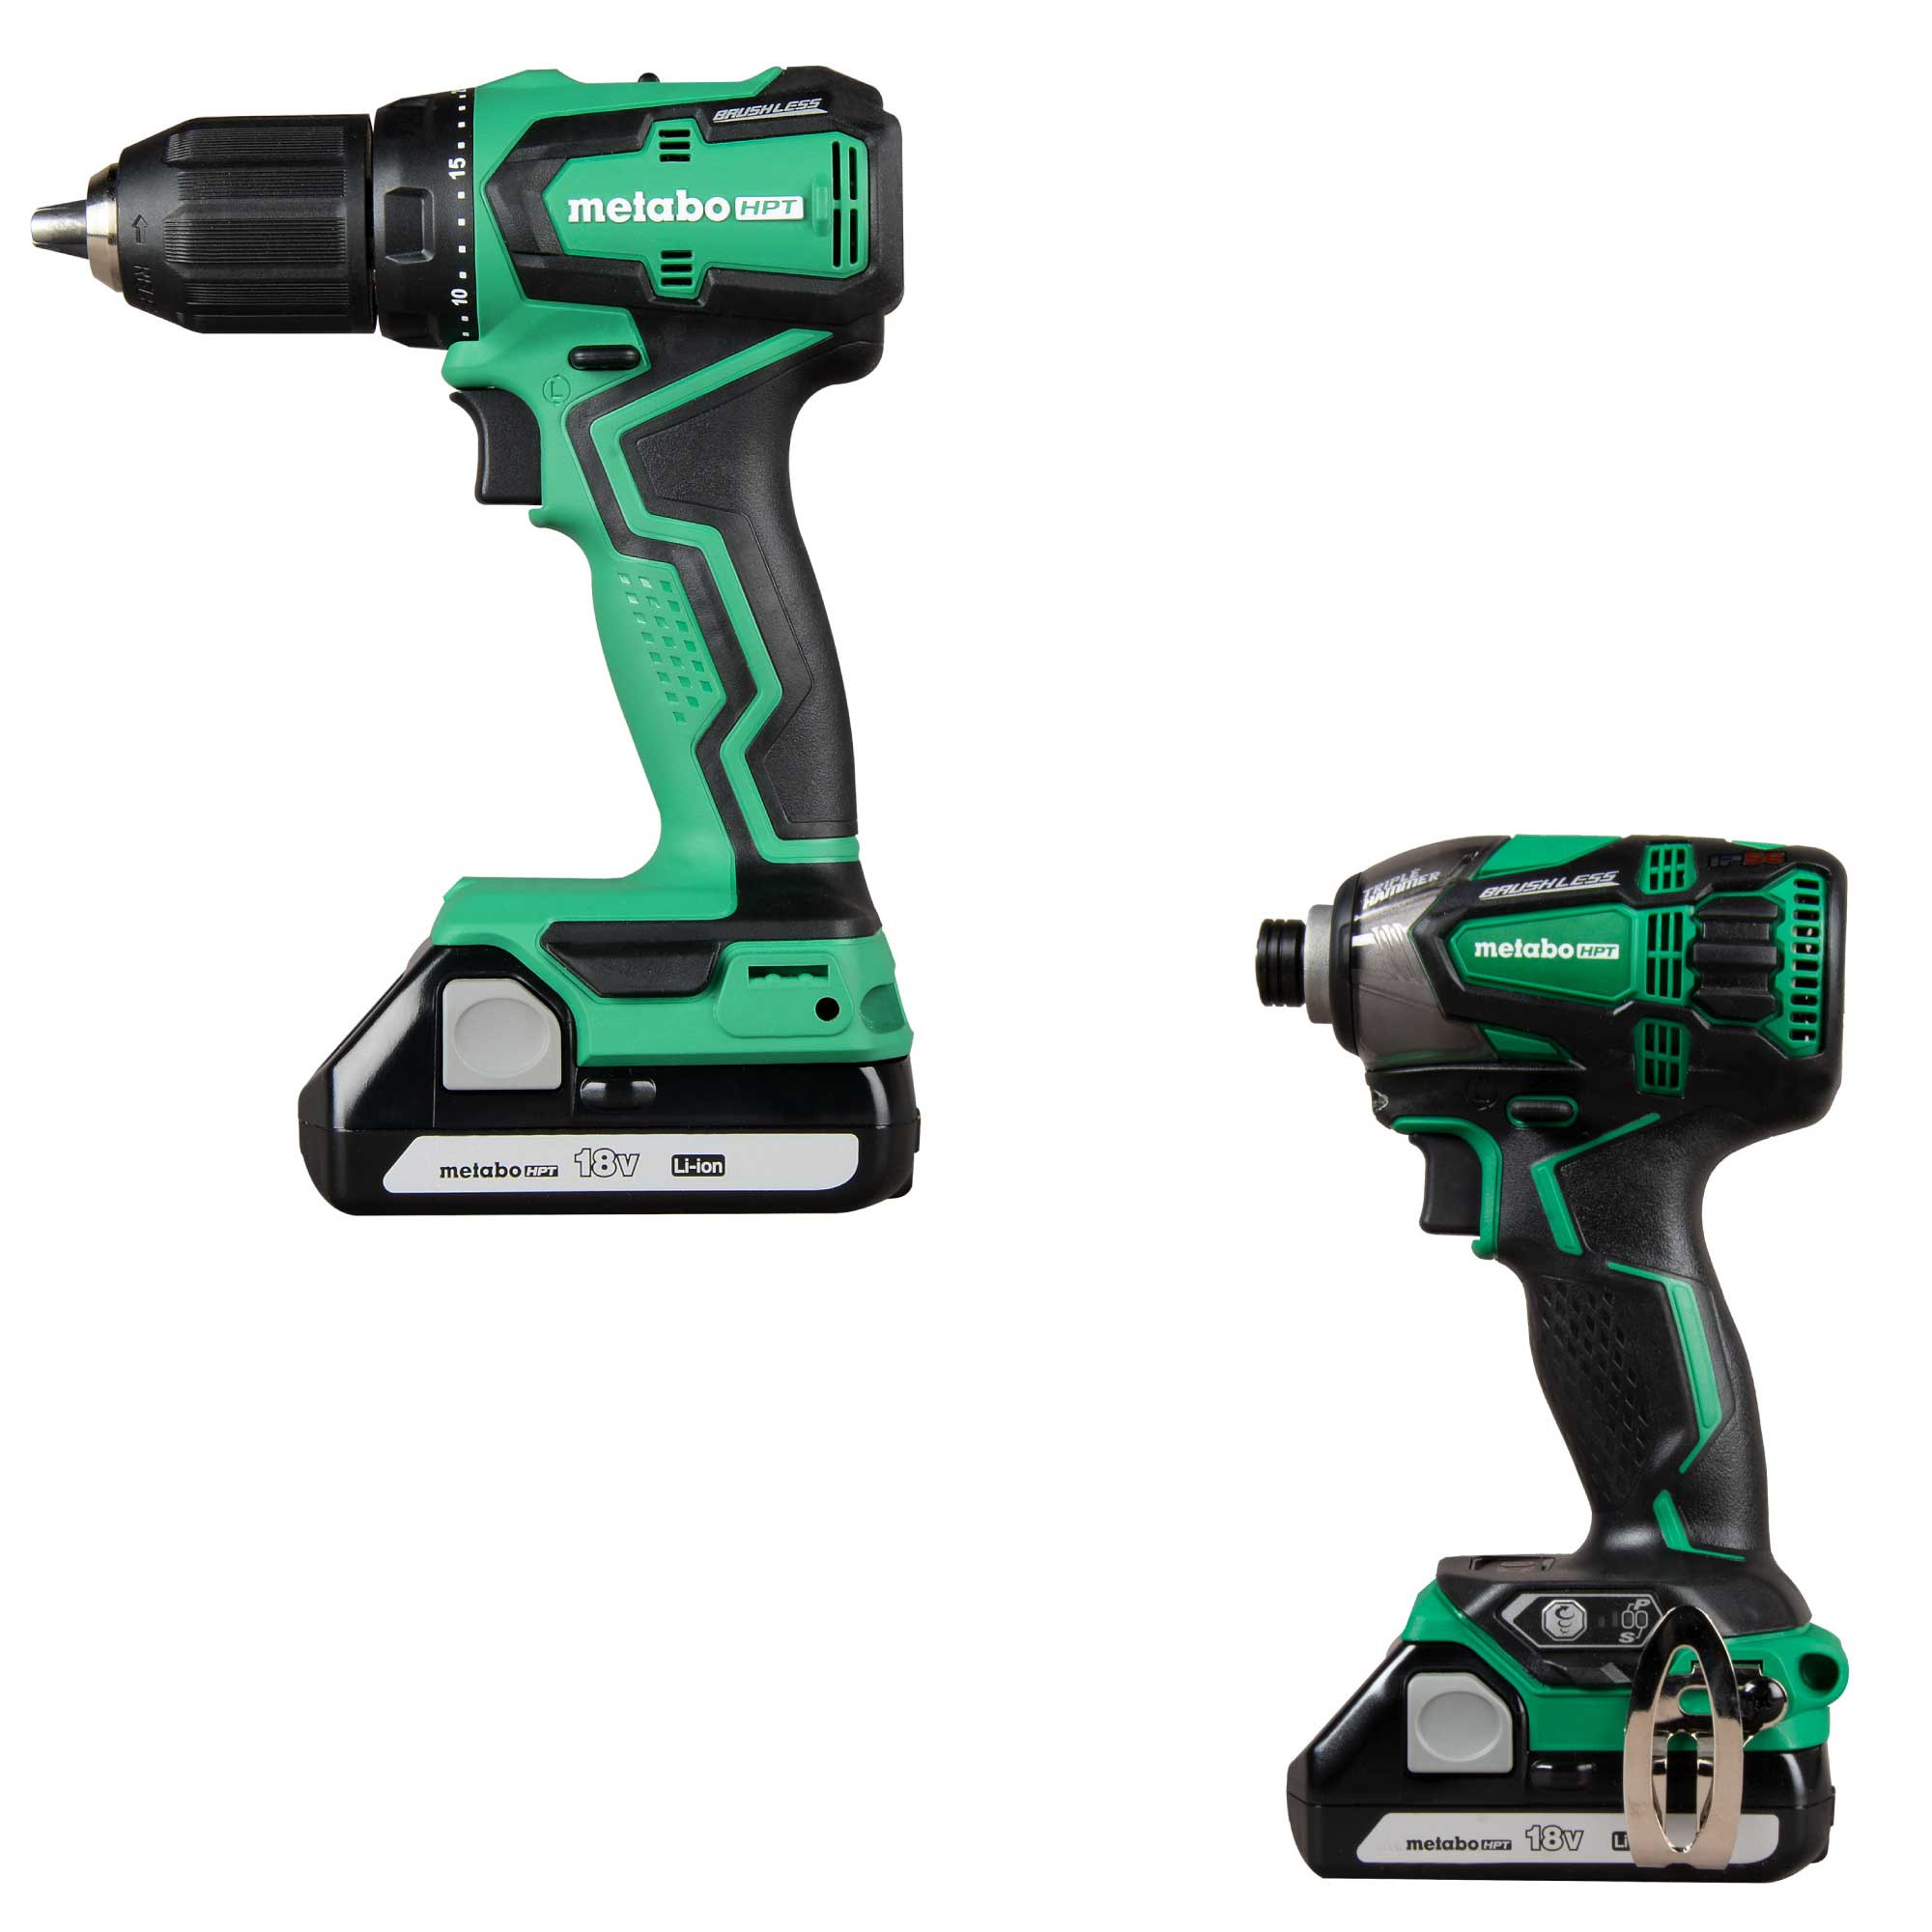 Metabo HPT MultiVolt 18-volt 1/2-in Keyless Brushless Cordless Drill (2-batteries included and Charger included) with MultiVolt 18-volt 1/4-in